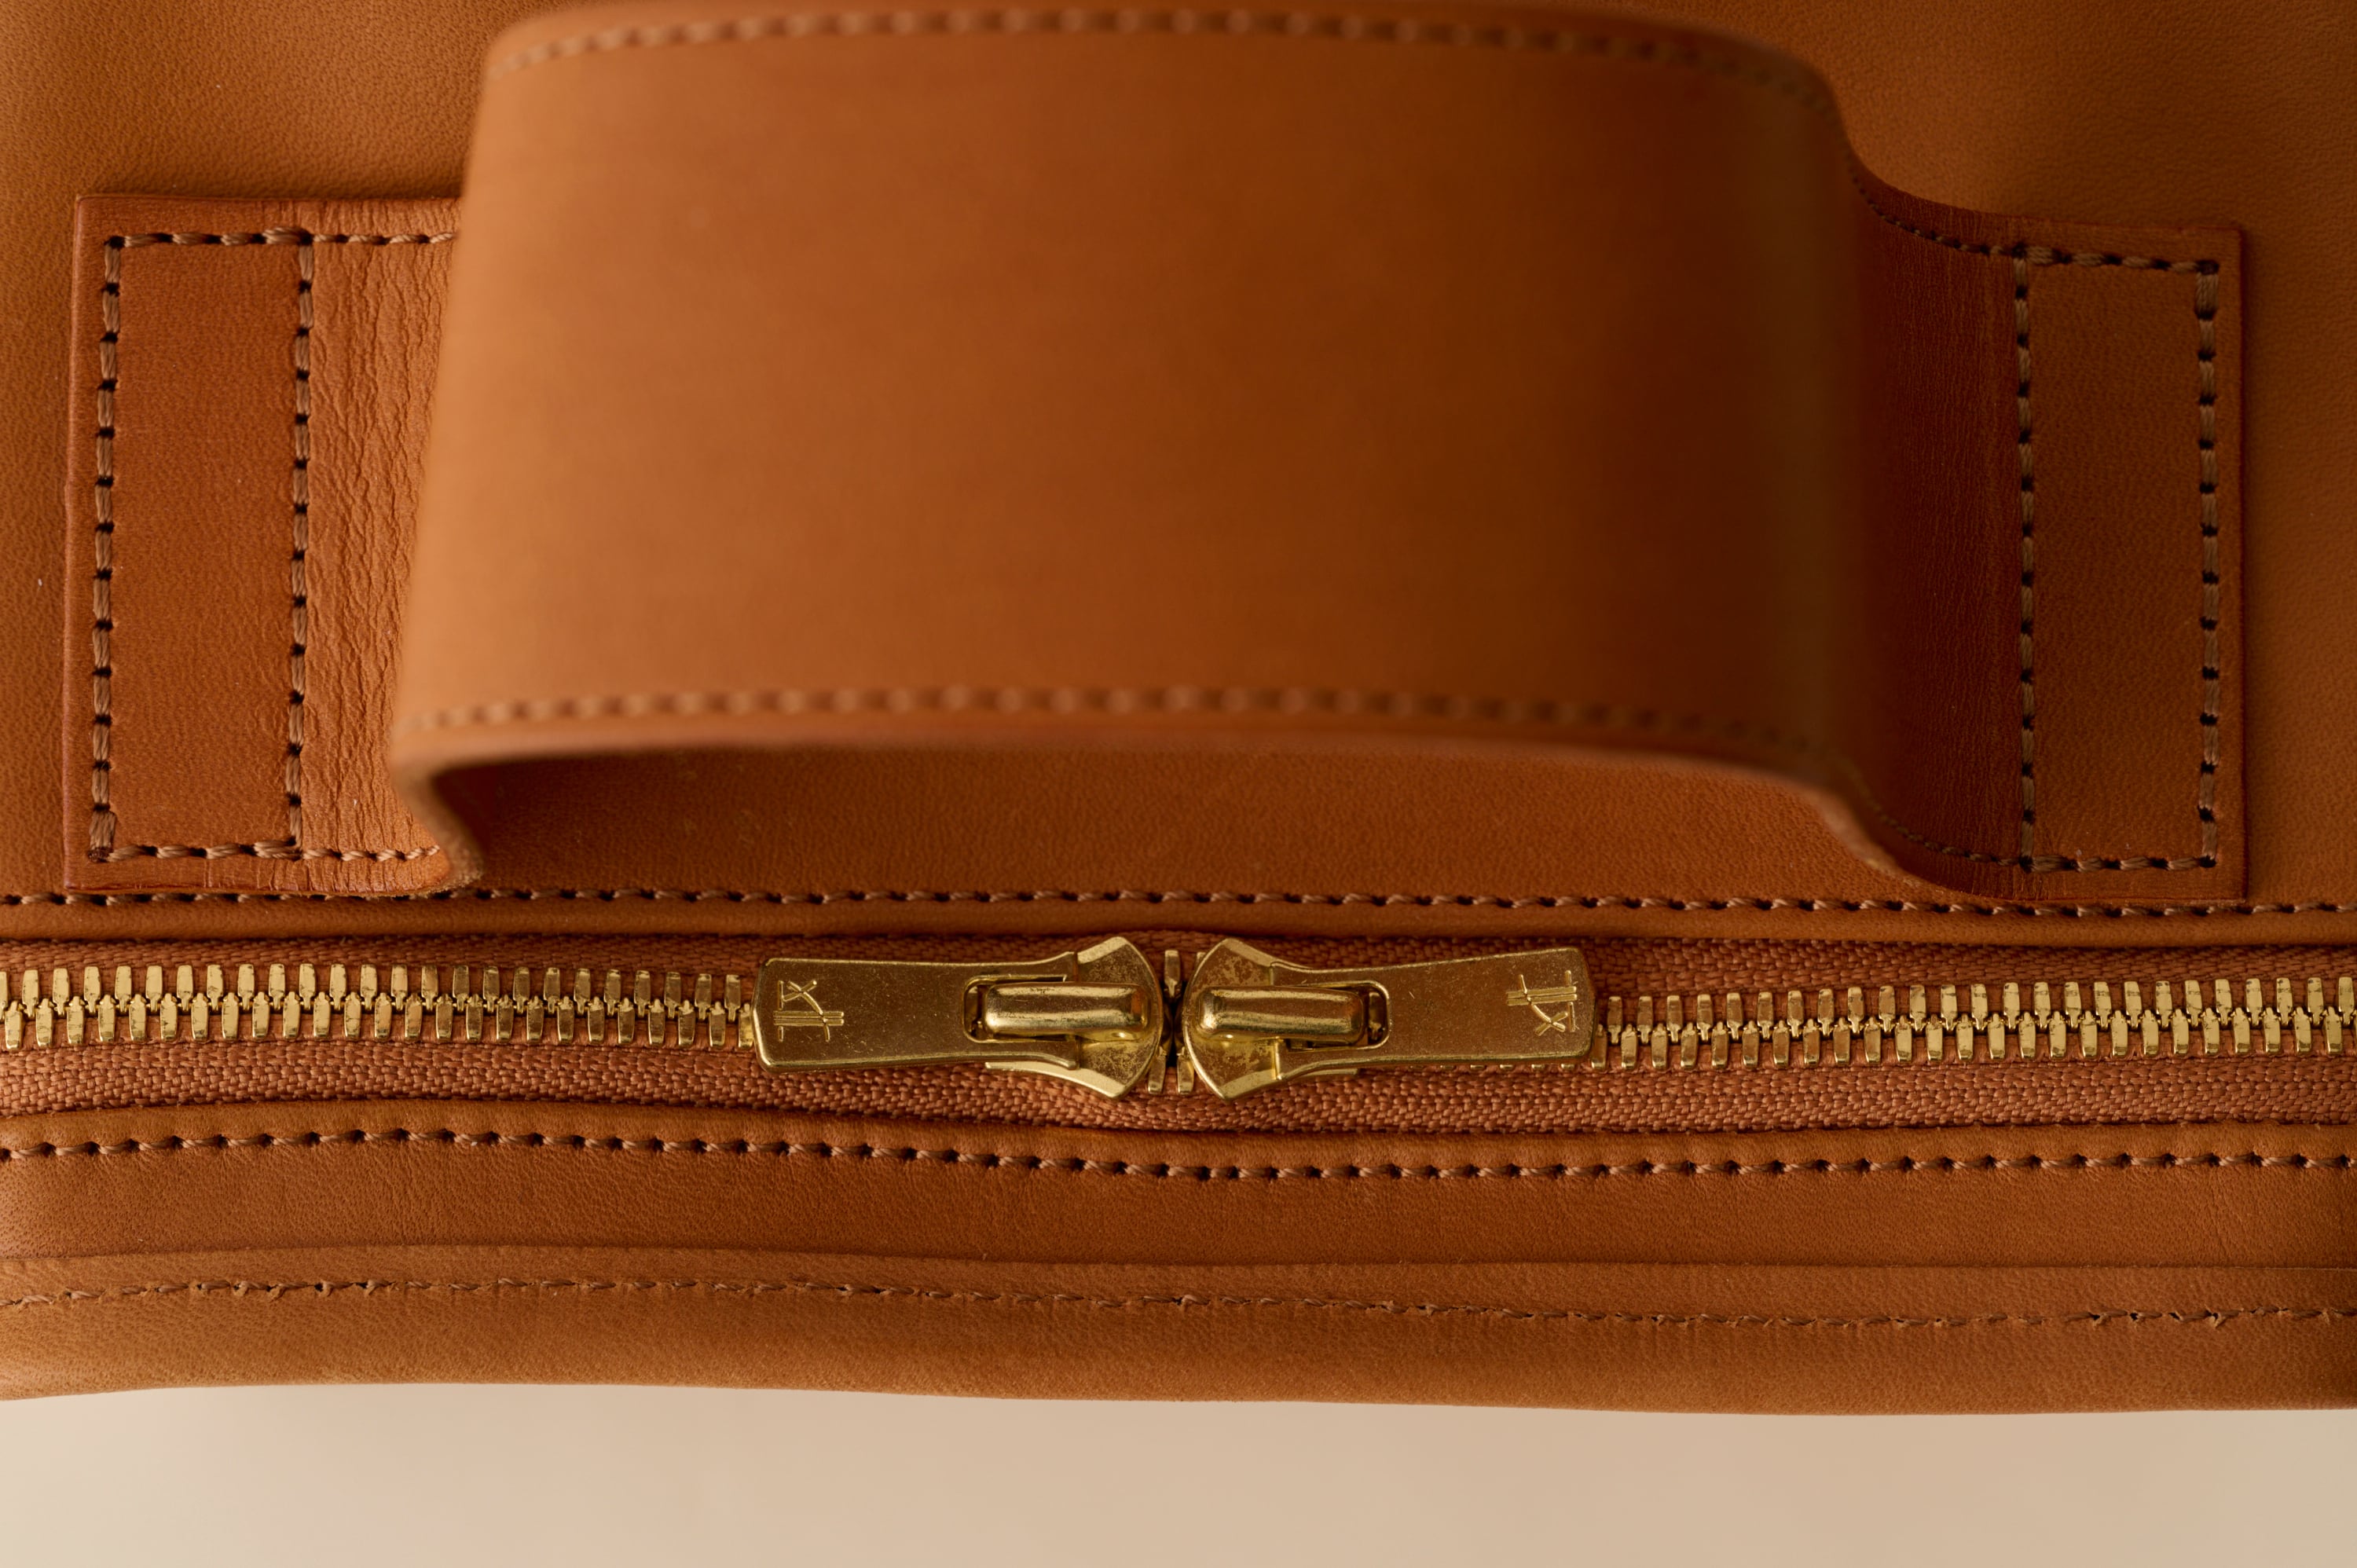 LIMITED】Camel Leather Mini Book Bag -EARTH LEATHER- | LIFESTYLIST